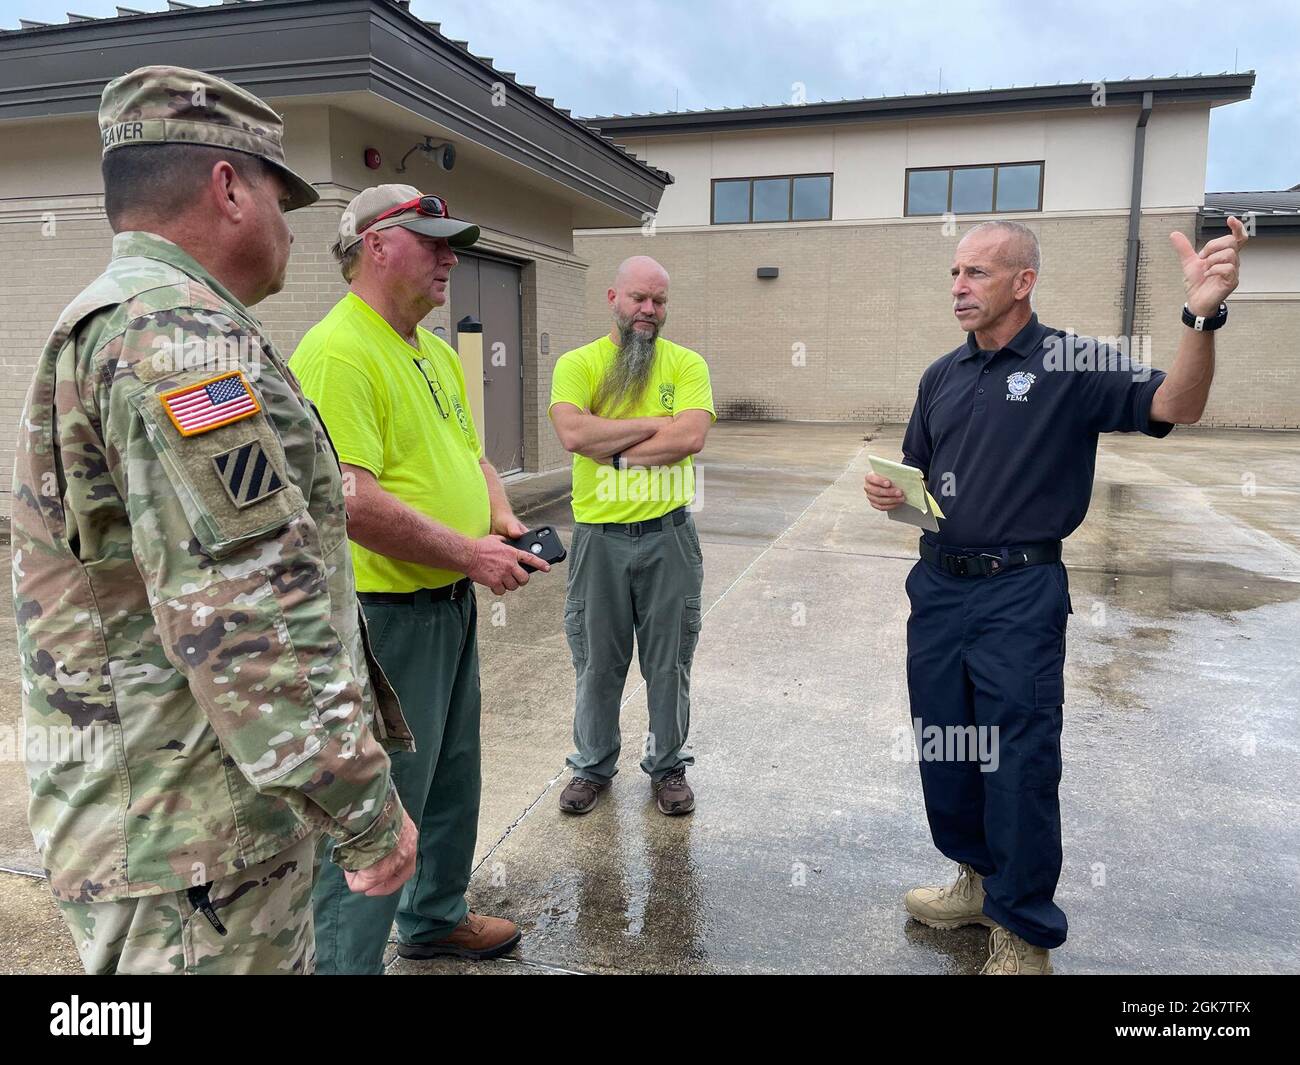 Col. Rick Weaver, Camp Shelby post commander, meets with members from the Federal Emergency Management Agency and the Mississippi Forestry Commission during the early stages of Hurricane Ida. Camp Shelby serves as a staging area for state and federal assets that will assist the citizens of Mississippi in response to the impacts from Hurricane Ida. (Mississippi Army National Guard photos by 2nd Lt. Michael Needham) Stock Photo